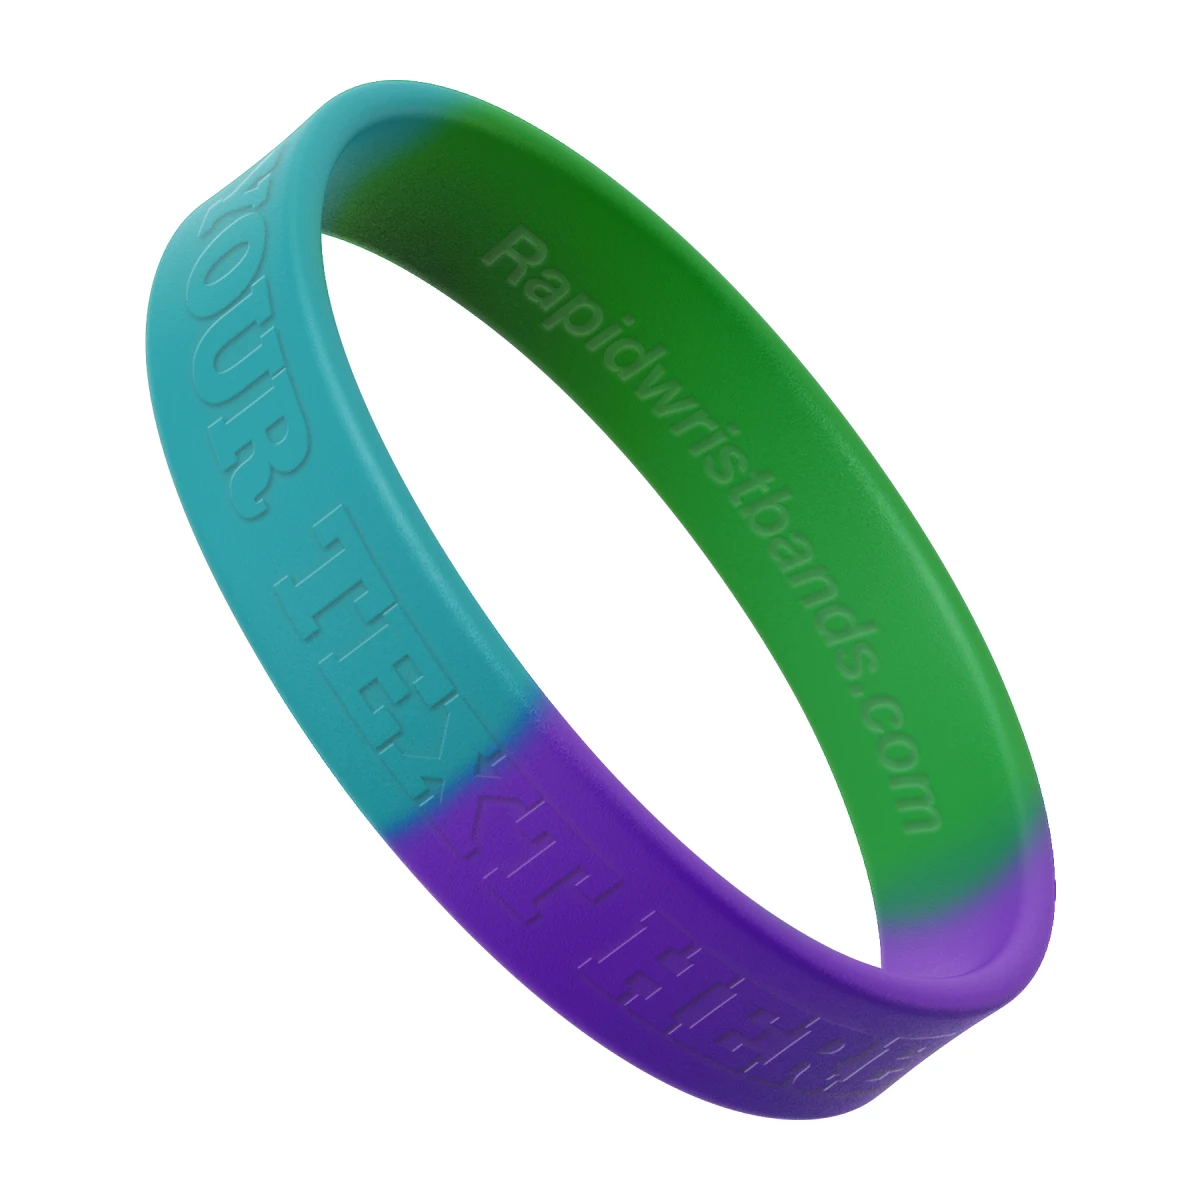 Segmented Teal/Green/Purple Wristband With Your Text Here Embossed